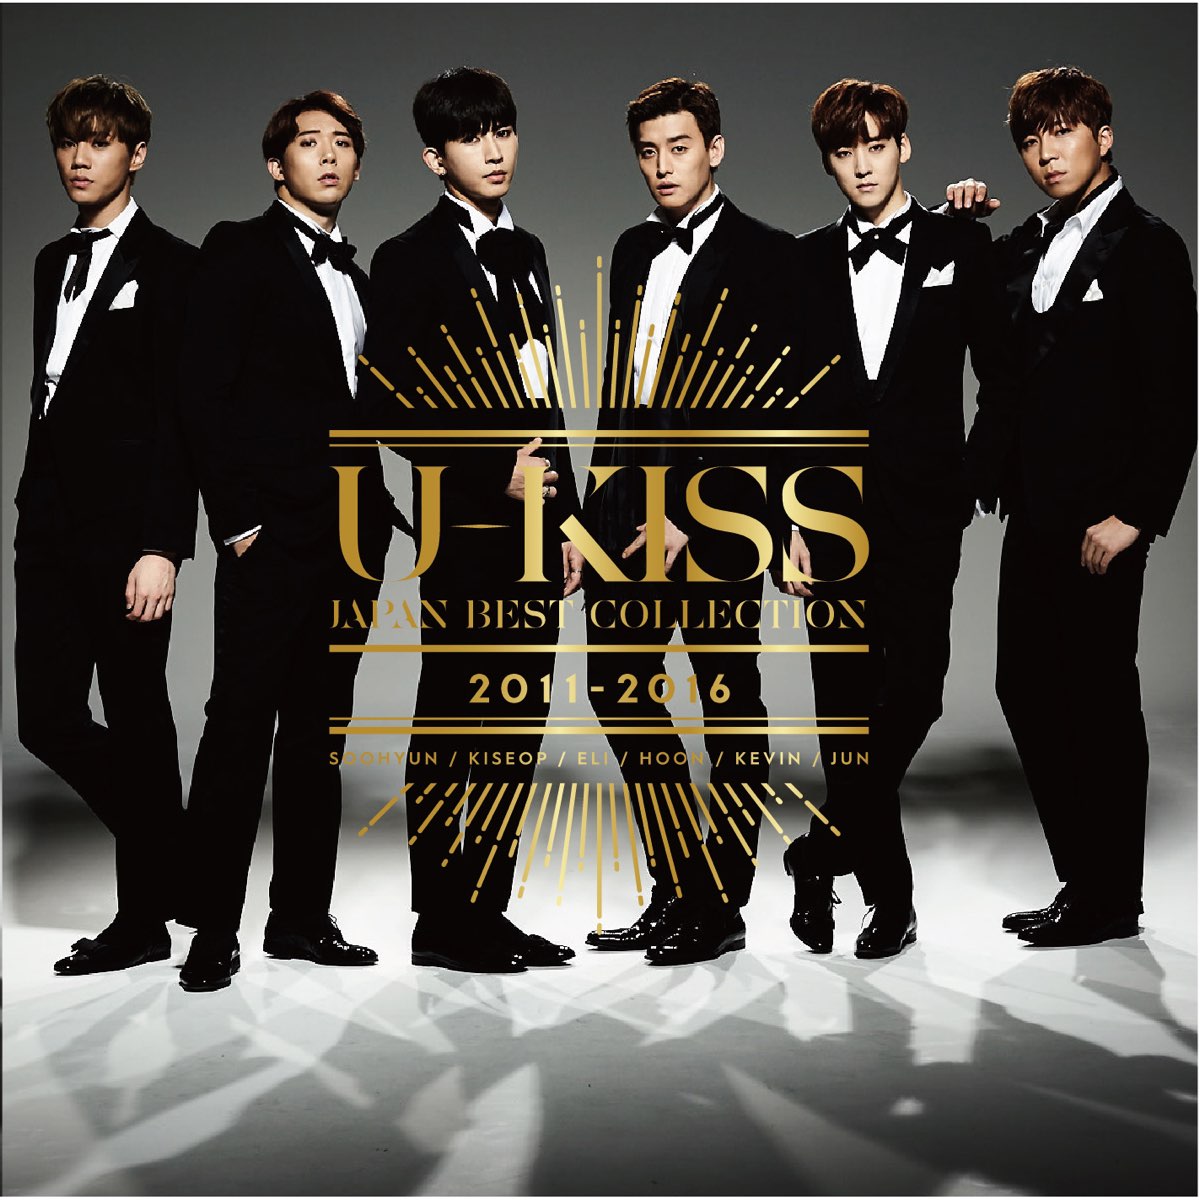 U-KISS Japan Best Collection 2011-2016 by U-KISS on Apple Music